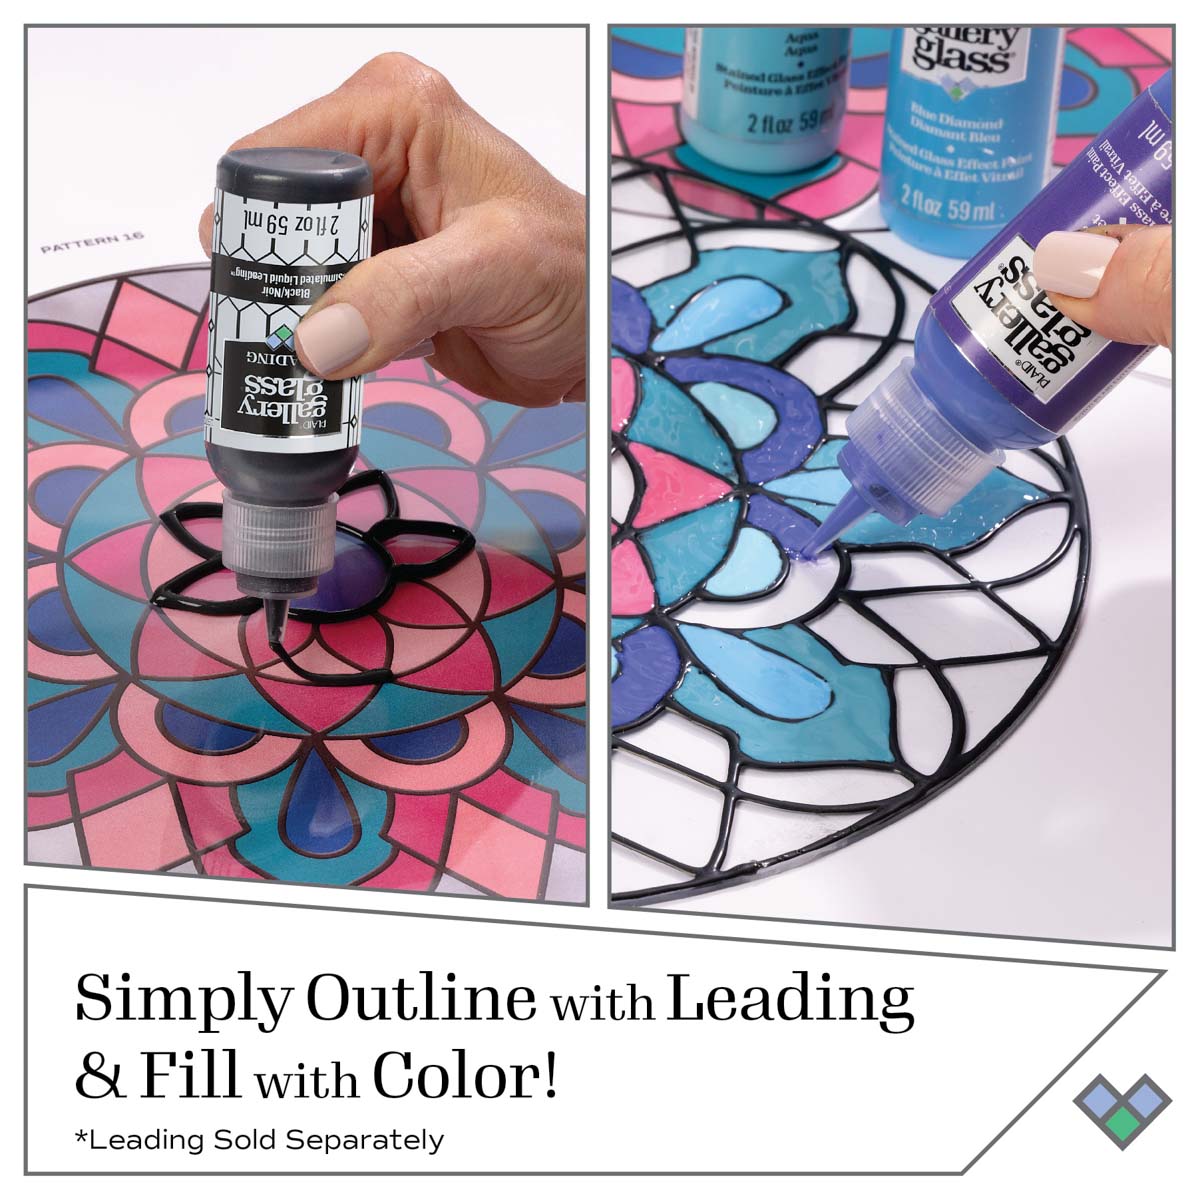 Gallery Glass ® Stained Glass Effect Paint - Emerald Green, 2 oz. - 19709